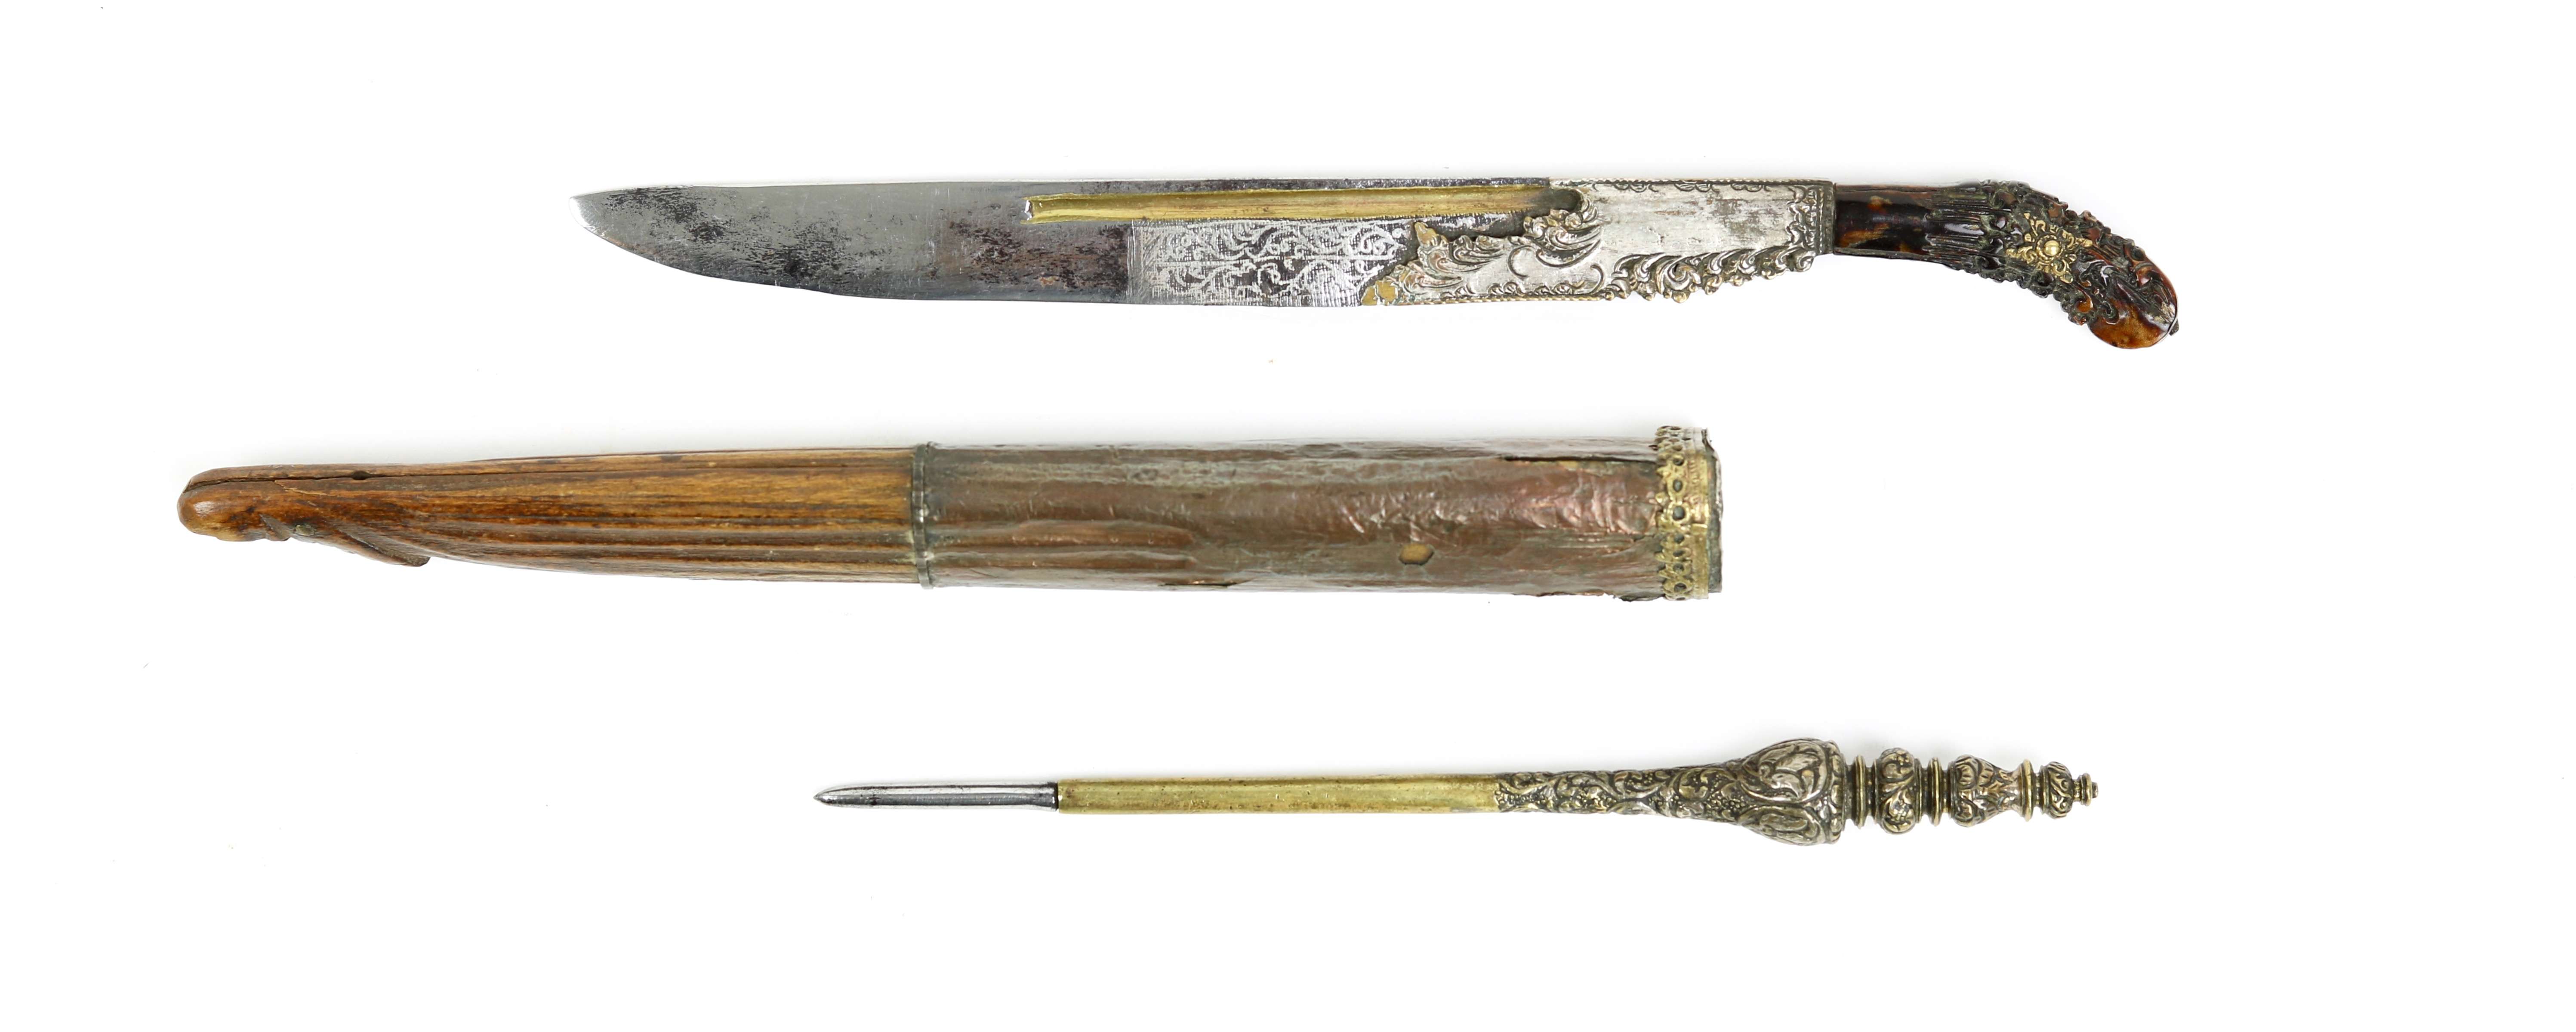 Sinhalese knife and writing stylus